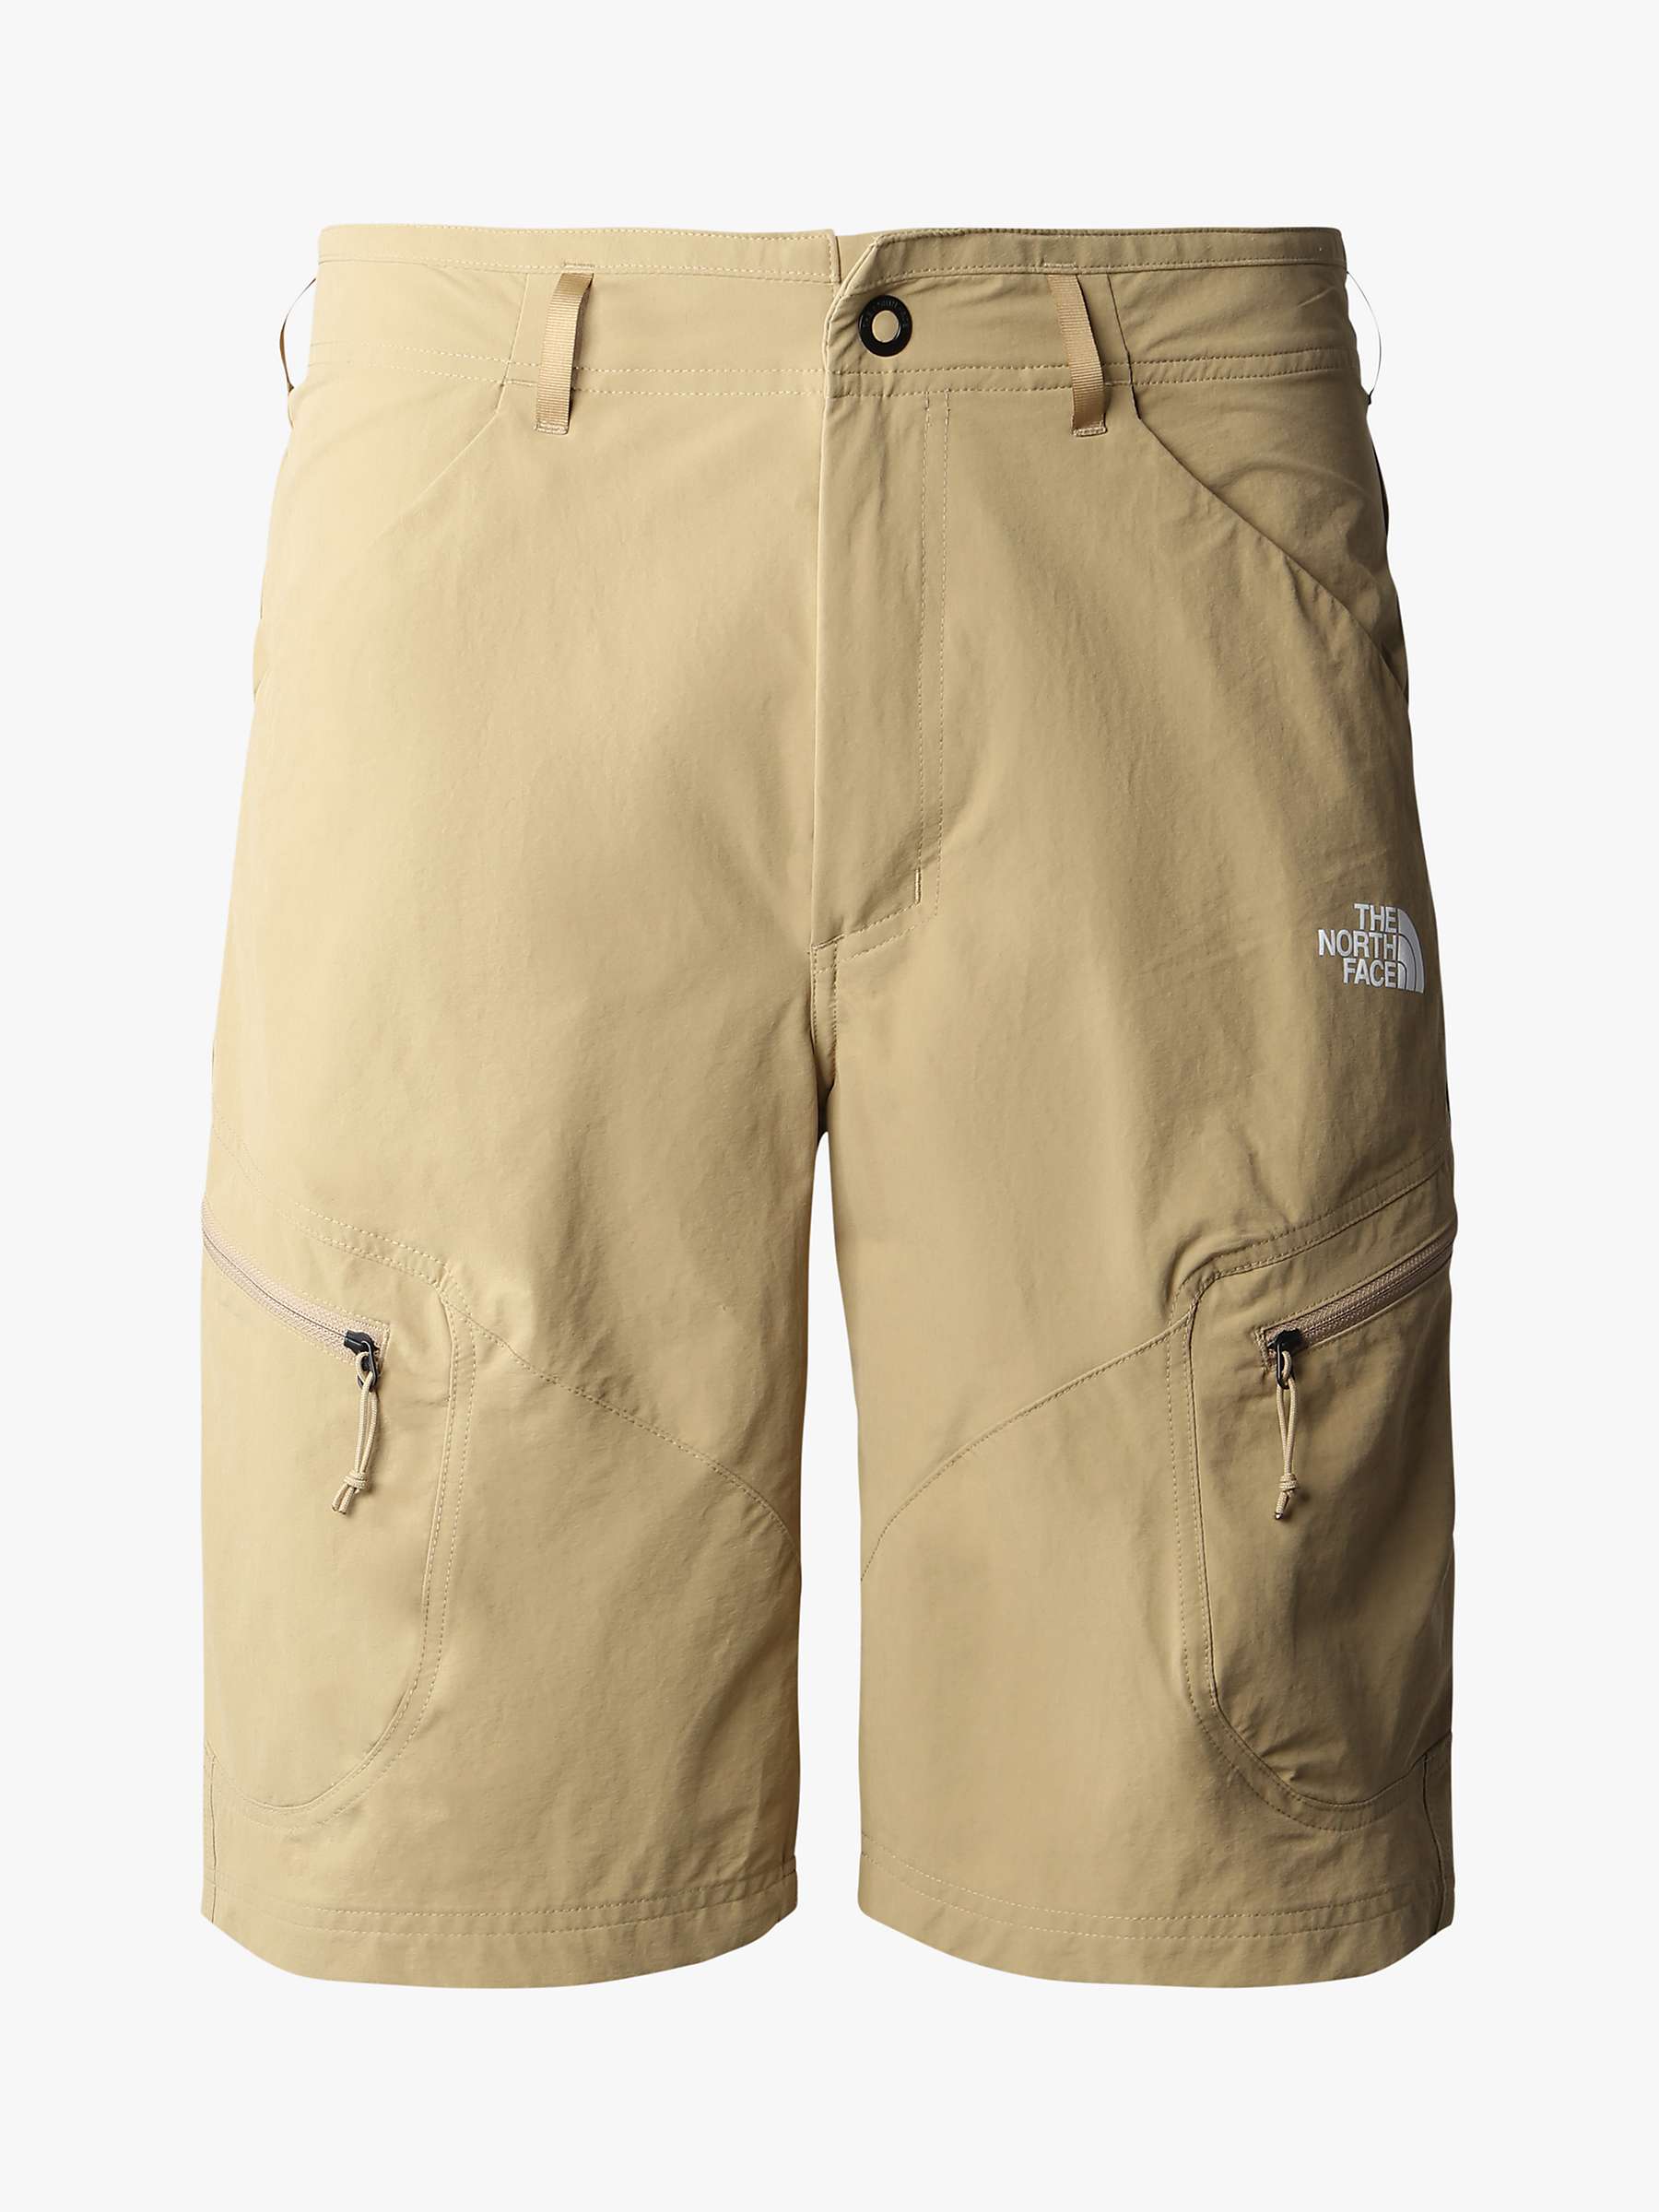 Buy The North Face Exploration Shorts Online at johnlewis.com